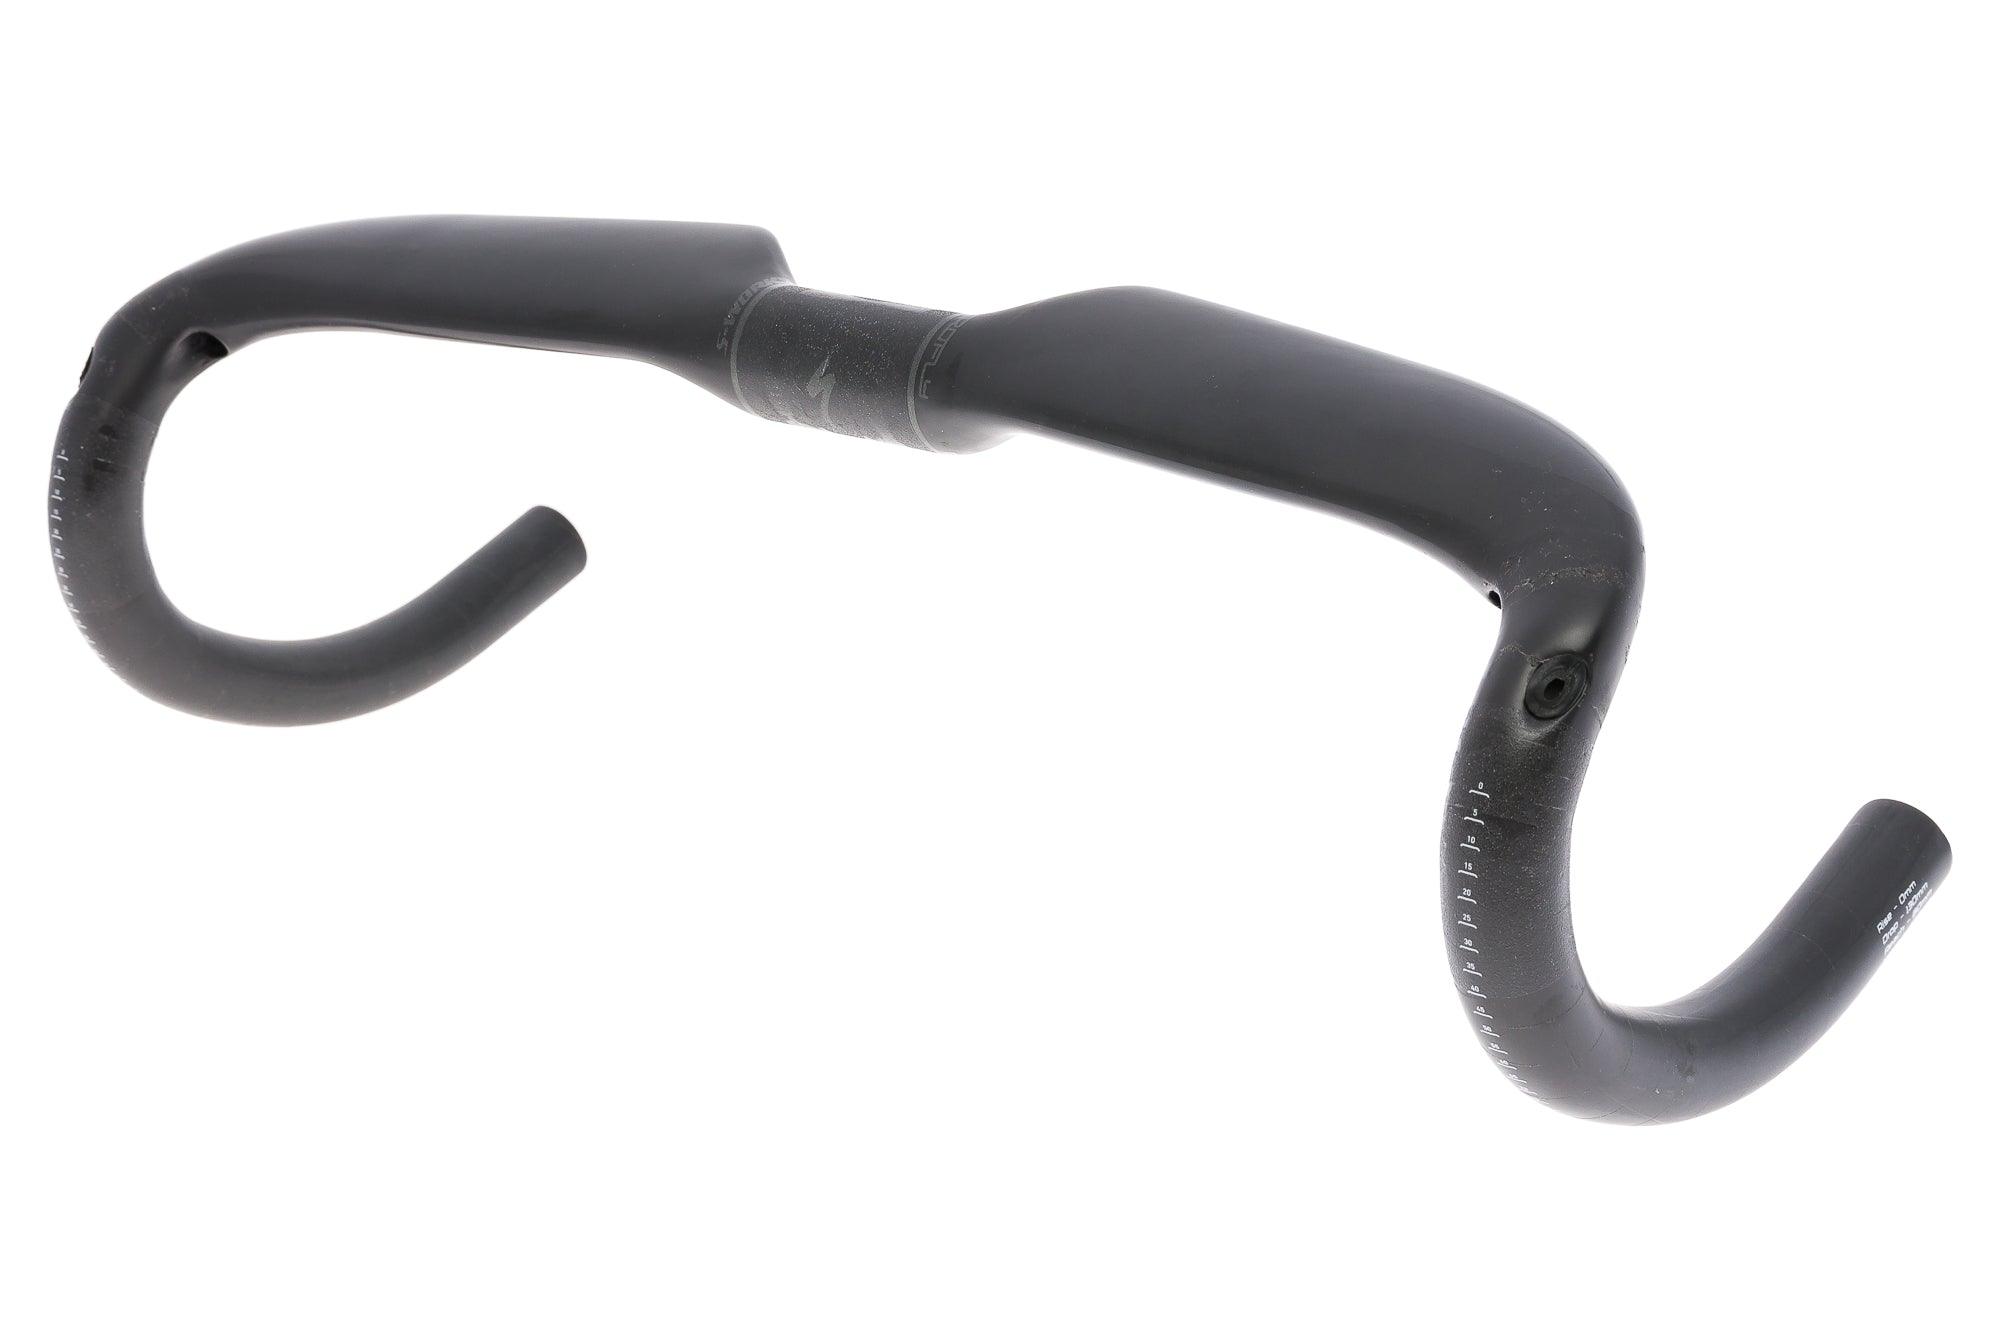 Specialized S-Works Aerofly Handlebar 31.8mm 42c | The Pro's Closet